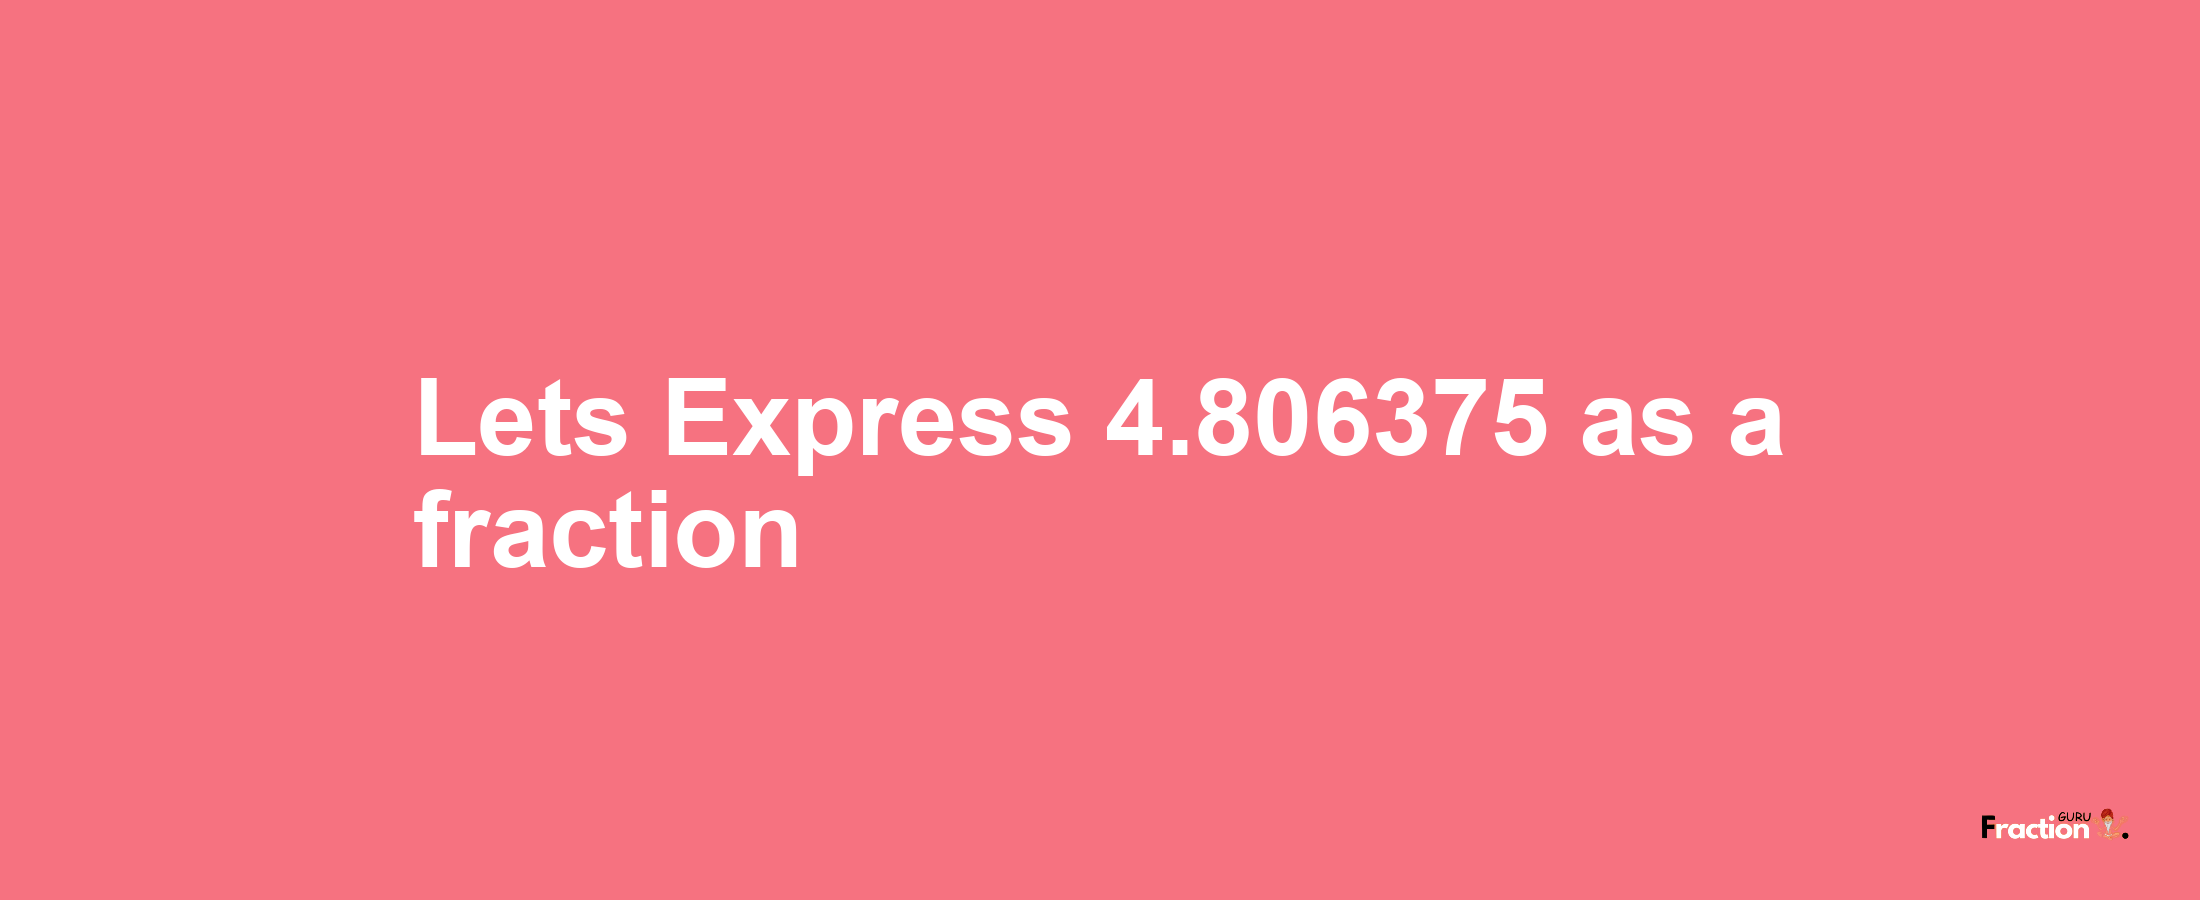 Lets Express 4.806375 as afraction